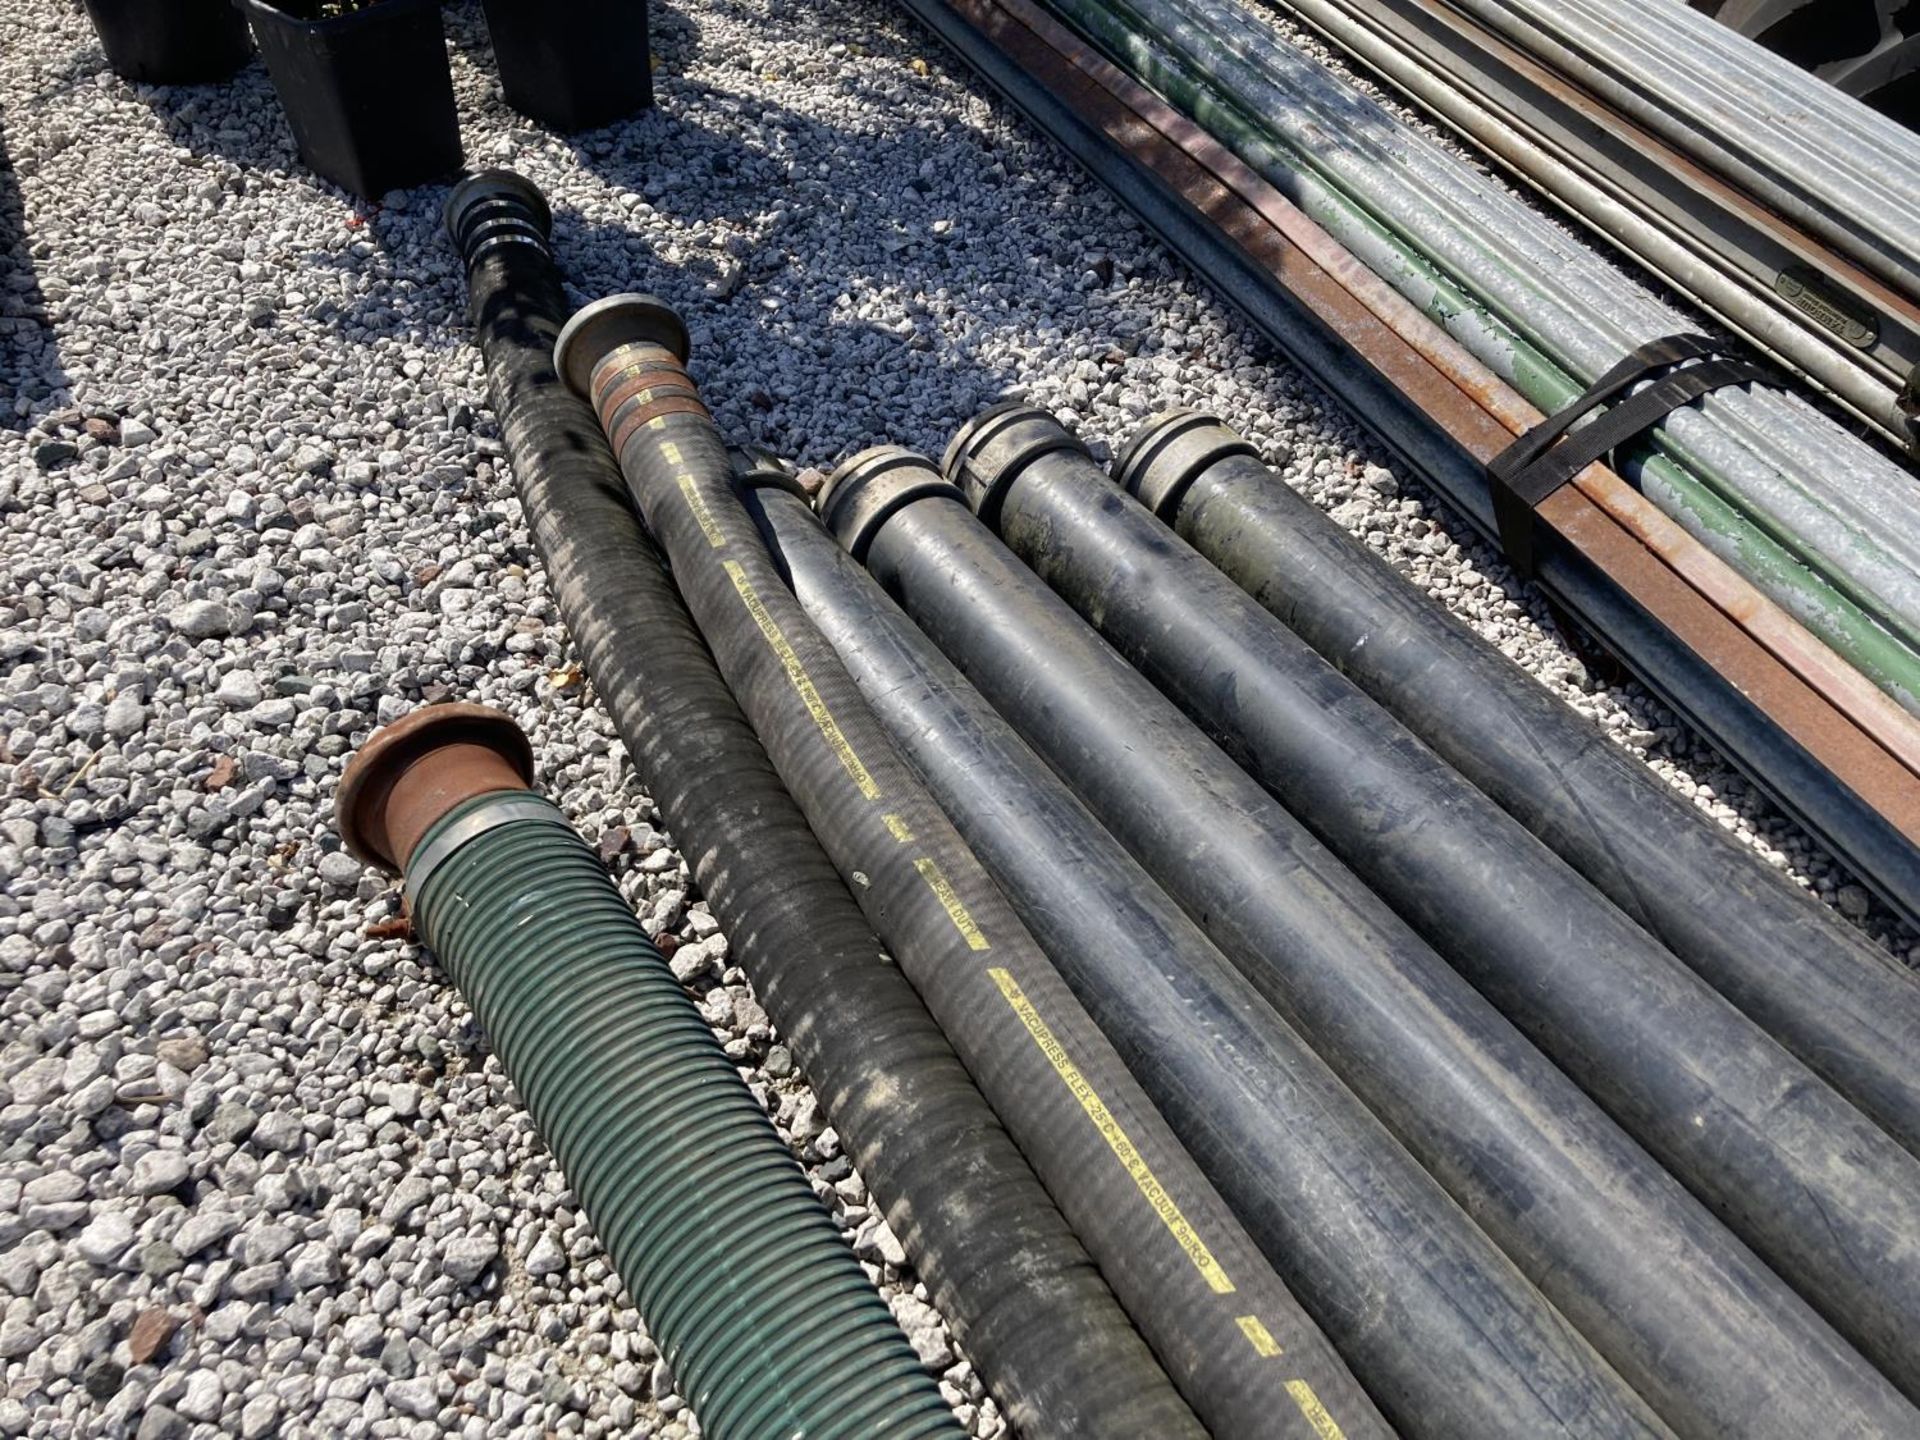 7 SLURRY PIPES 4X16' PLUS OTHERS + VAT - Image 3 of 3